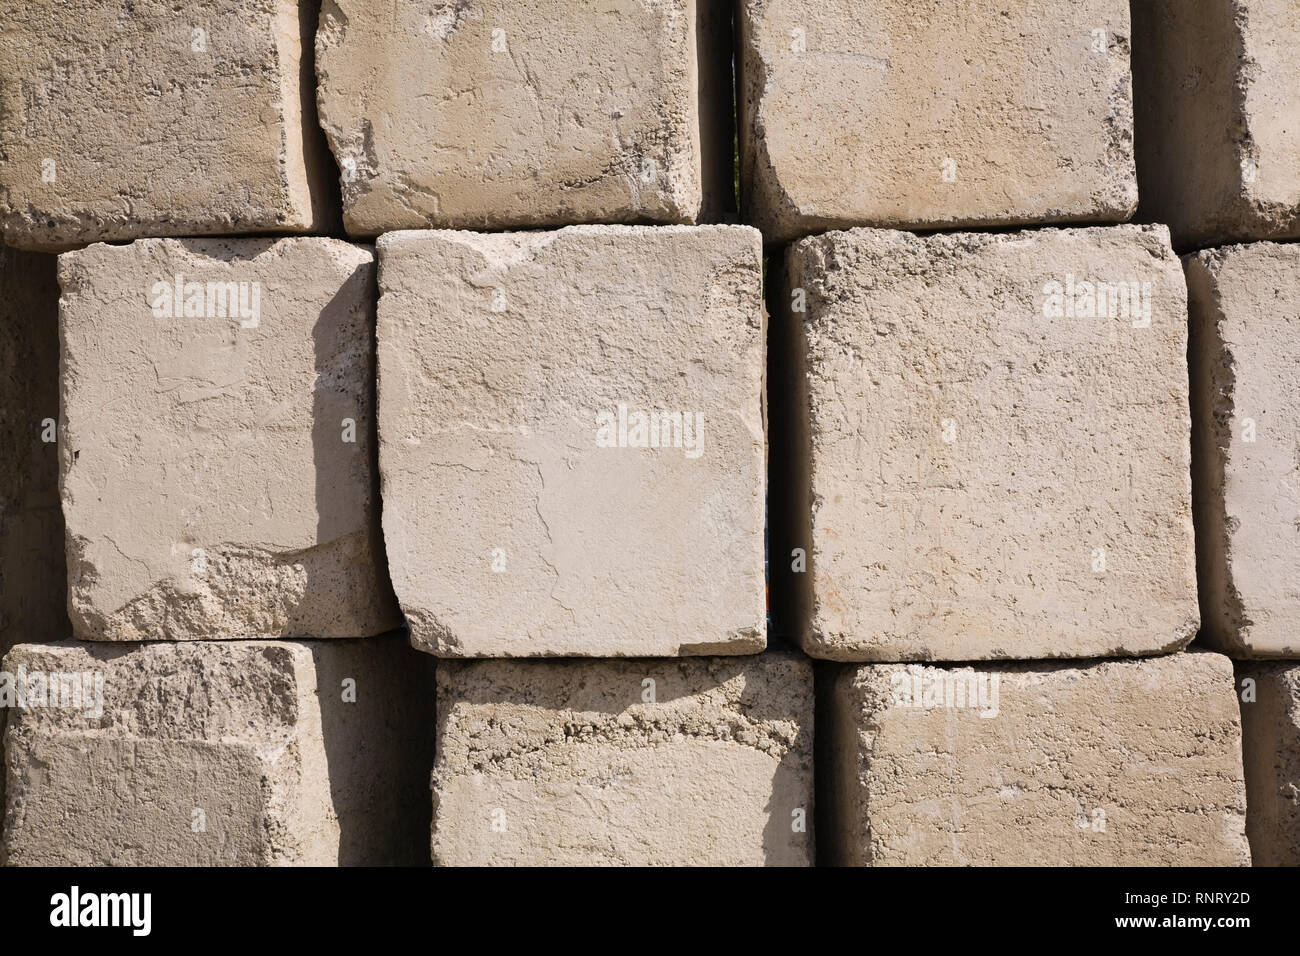 Close-up of large and heavy stacked square shaped concrete blocks Stock